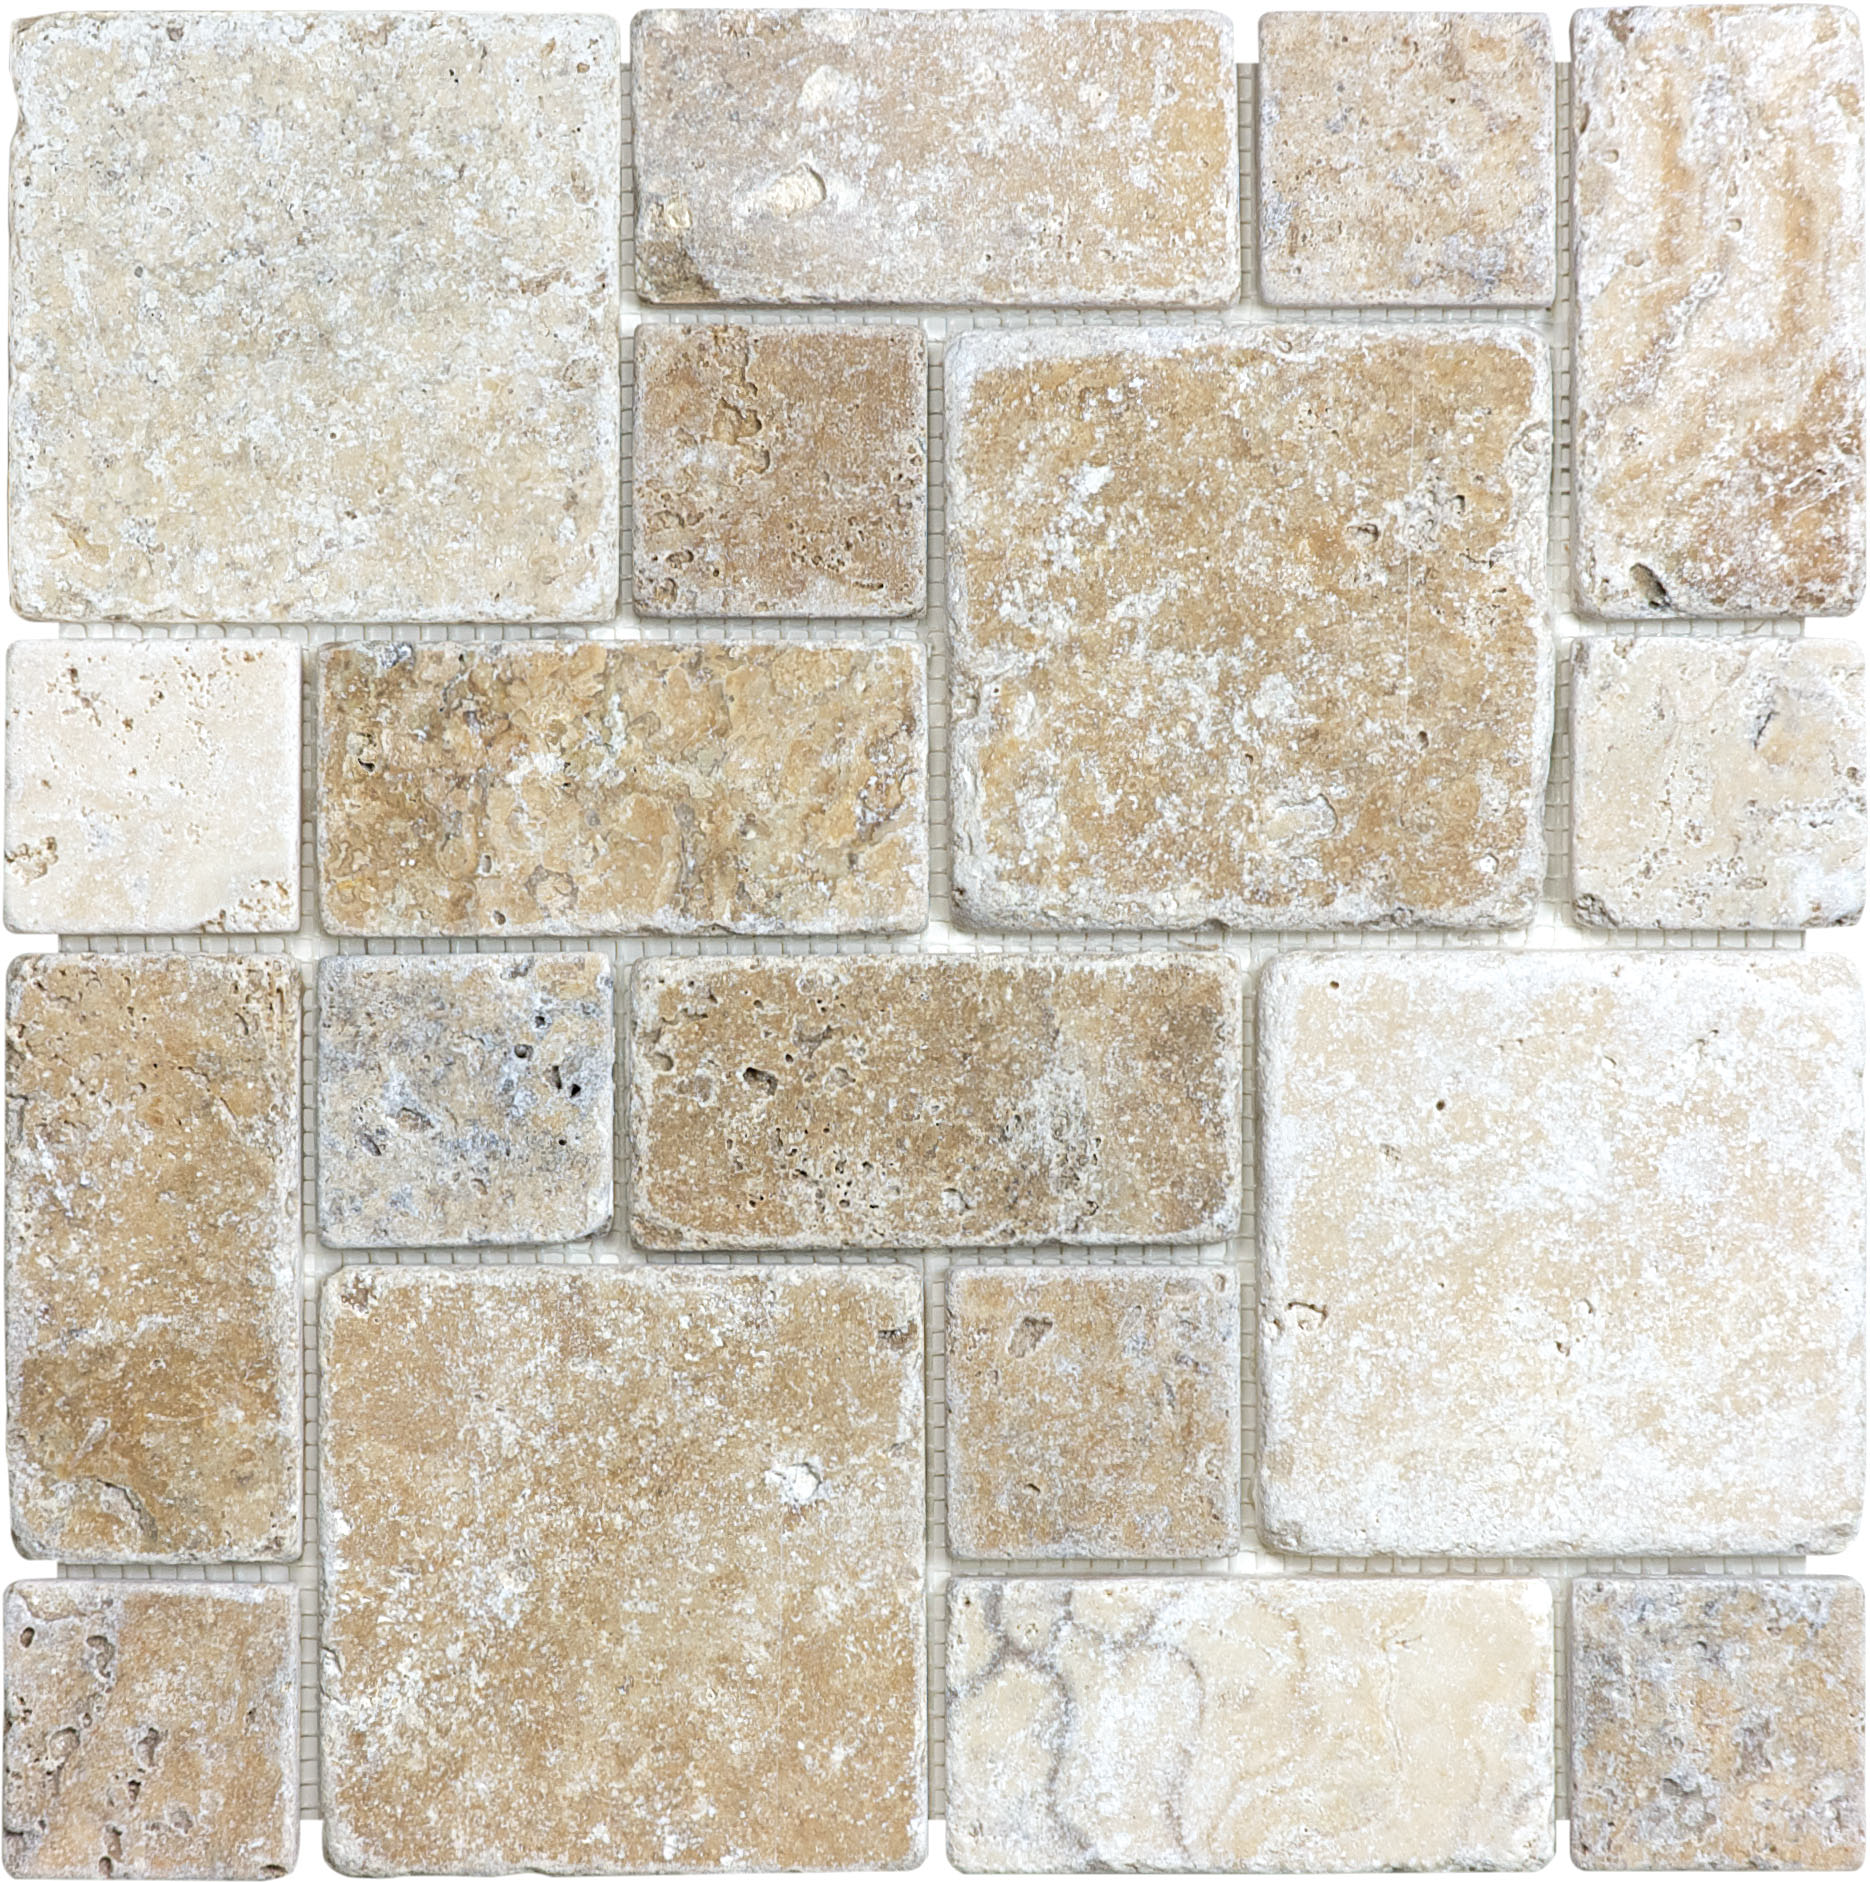 travertine roman pattern pattern natural stone mosaic from picasso anatolia collection distributed by surface group international tumbled finish tumbled edge mesh shape